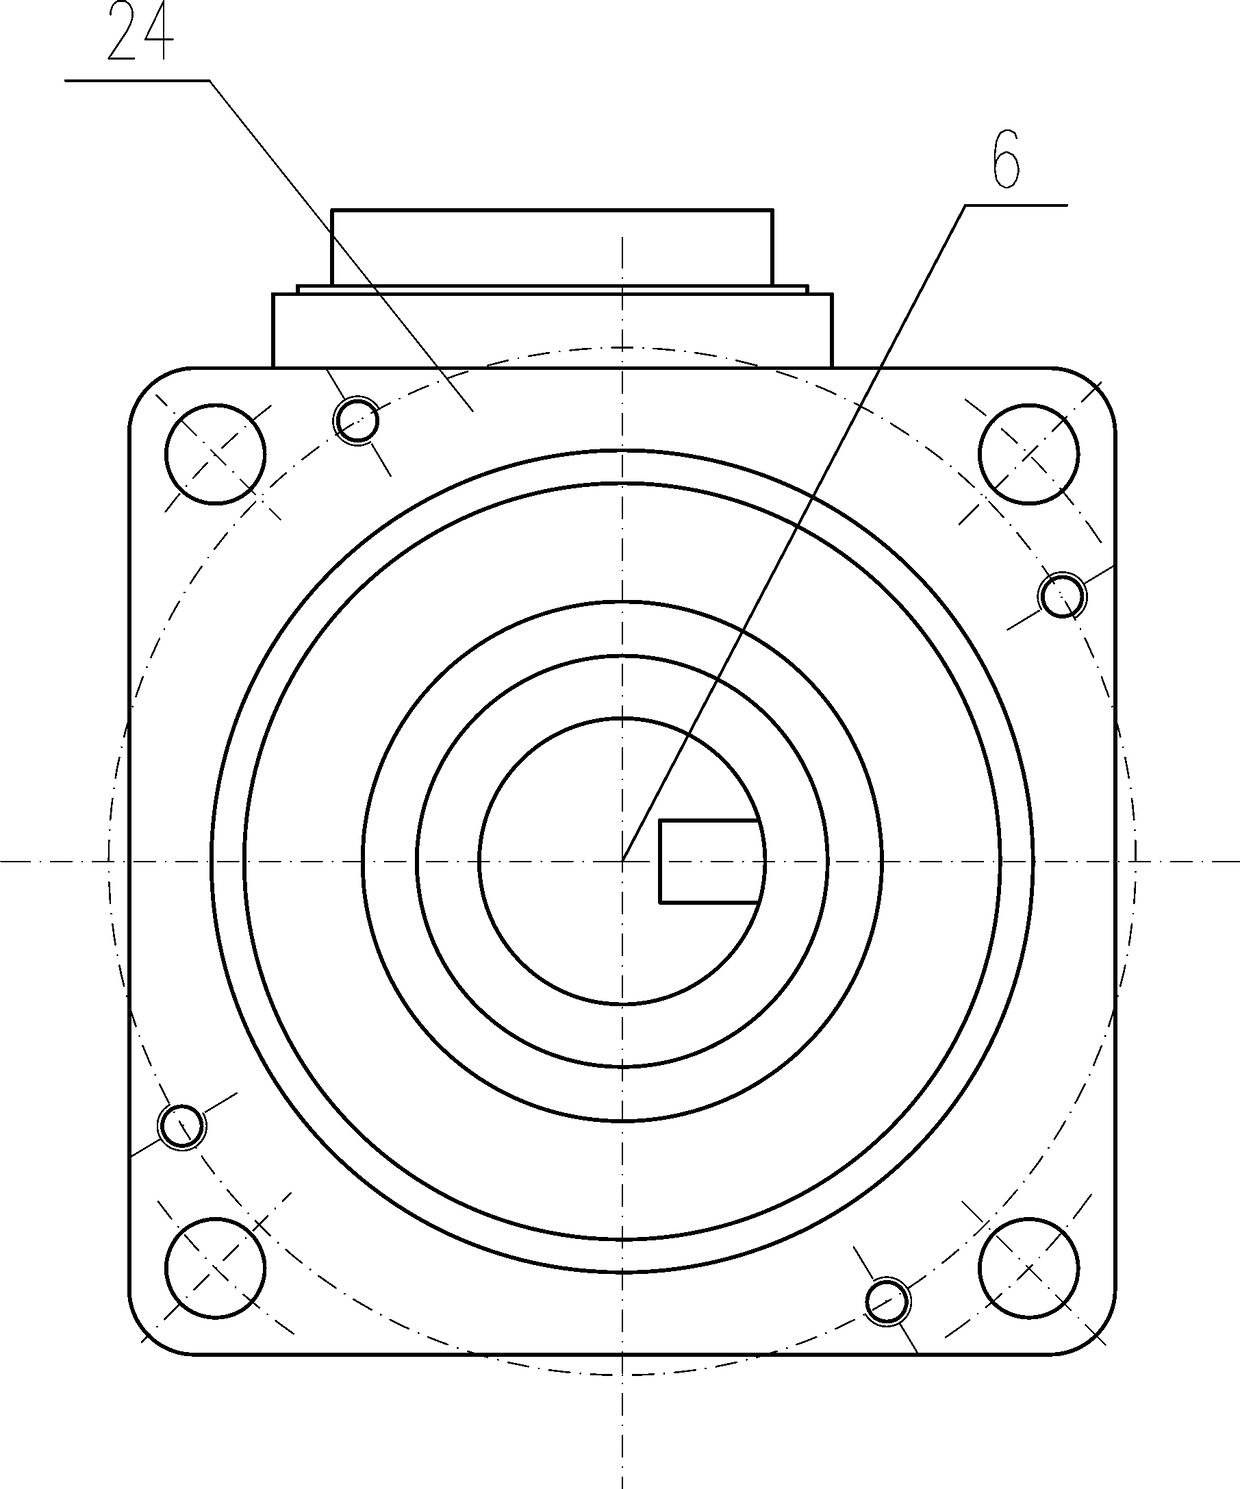 Concentrated winding permanent magnet motor